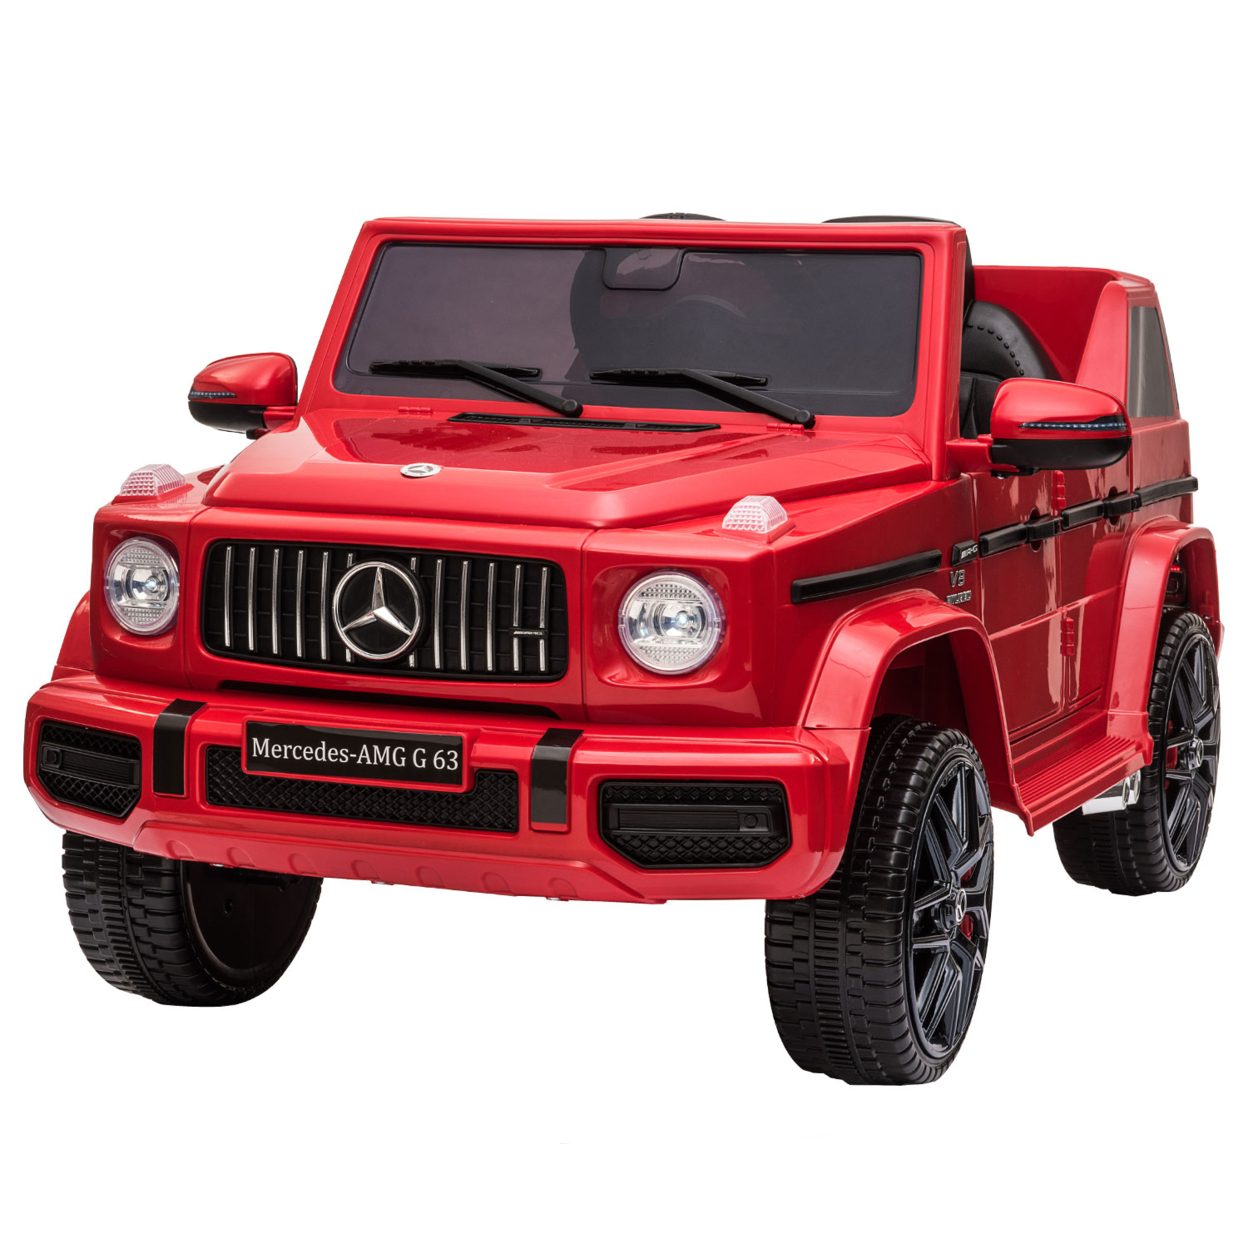 12V kids Ride On Jeep with Remote Control, Electric Car for Kids 3-6 Years, 3 Speeds, Music Story Playing, LED Lights, MP3 Player,Red